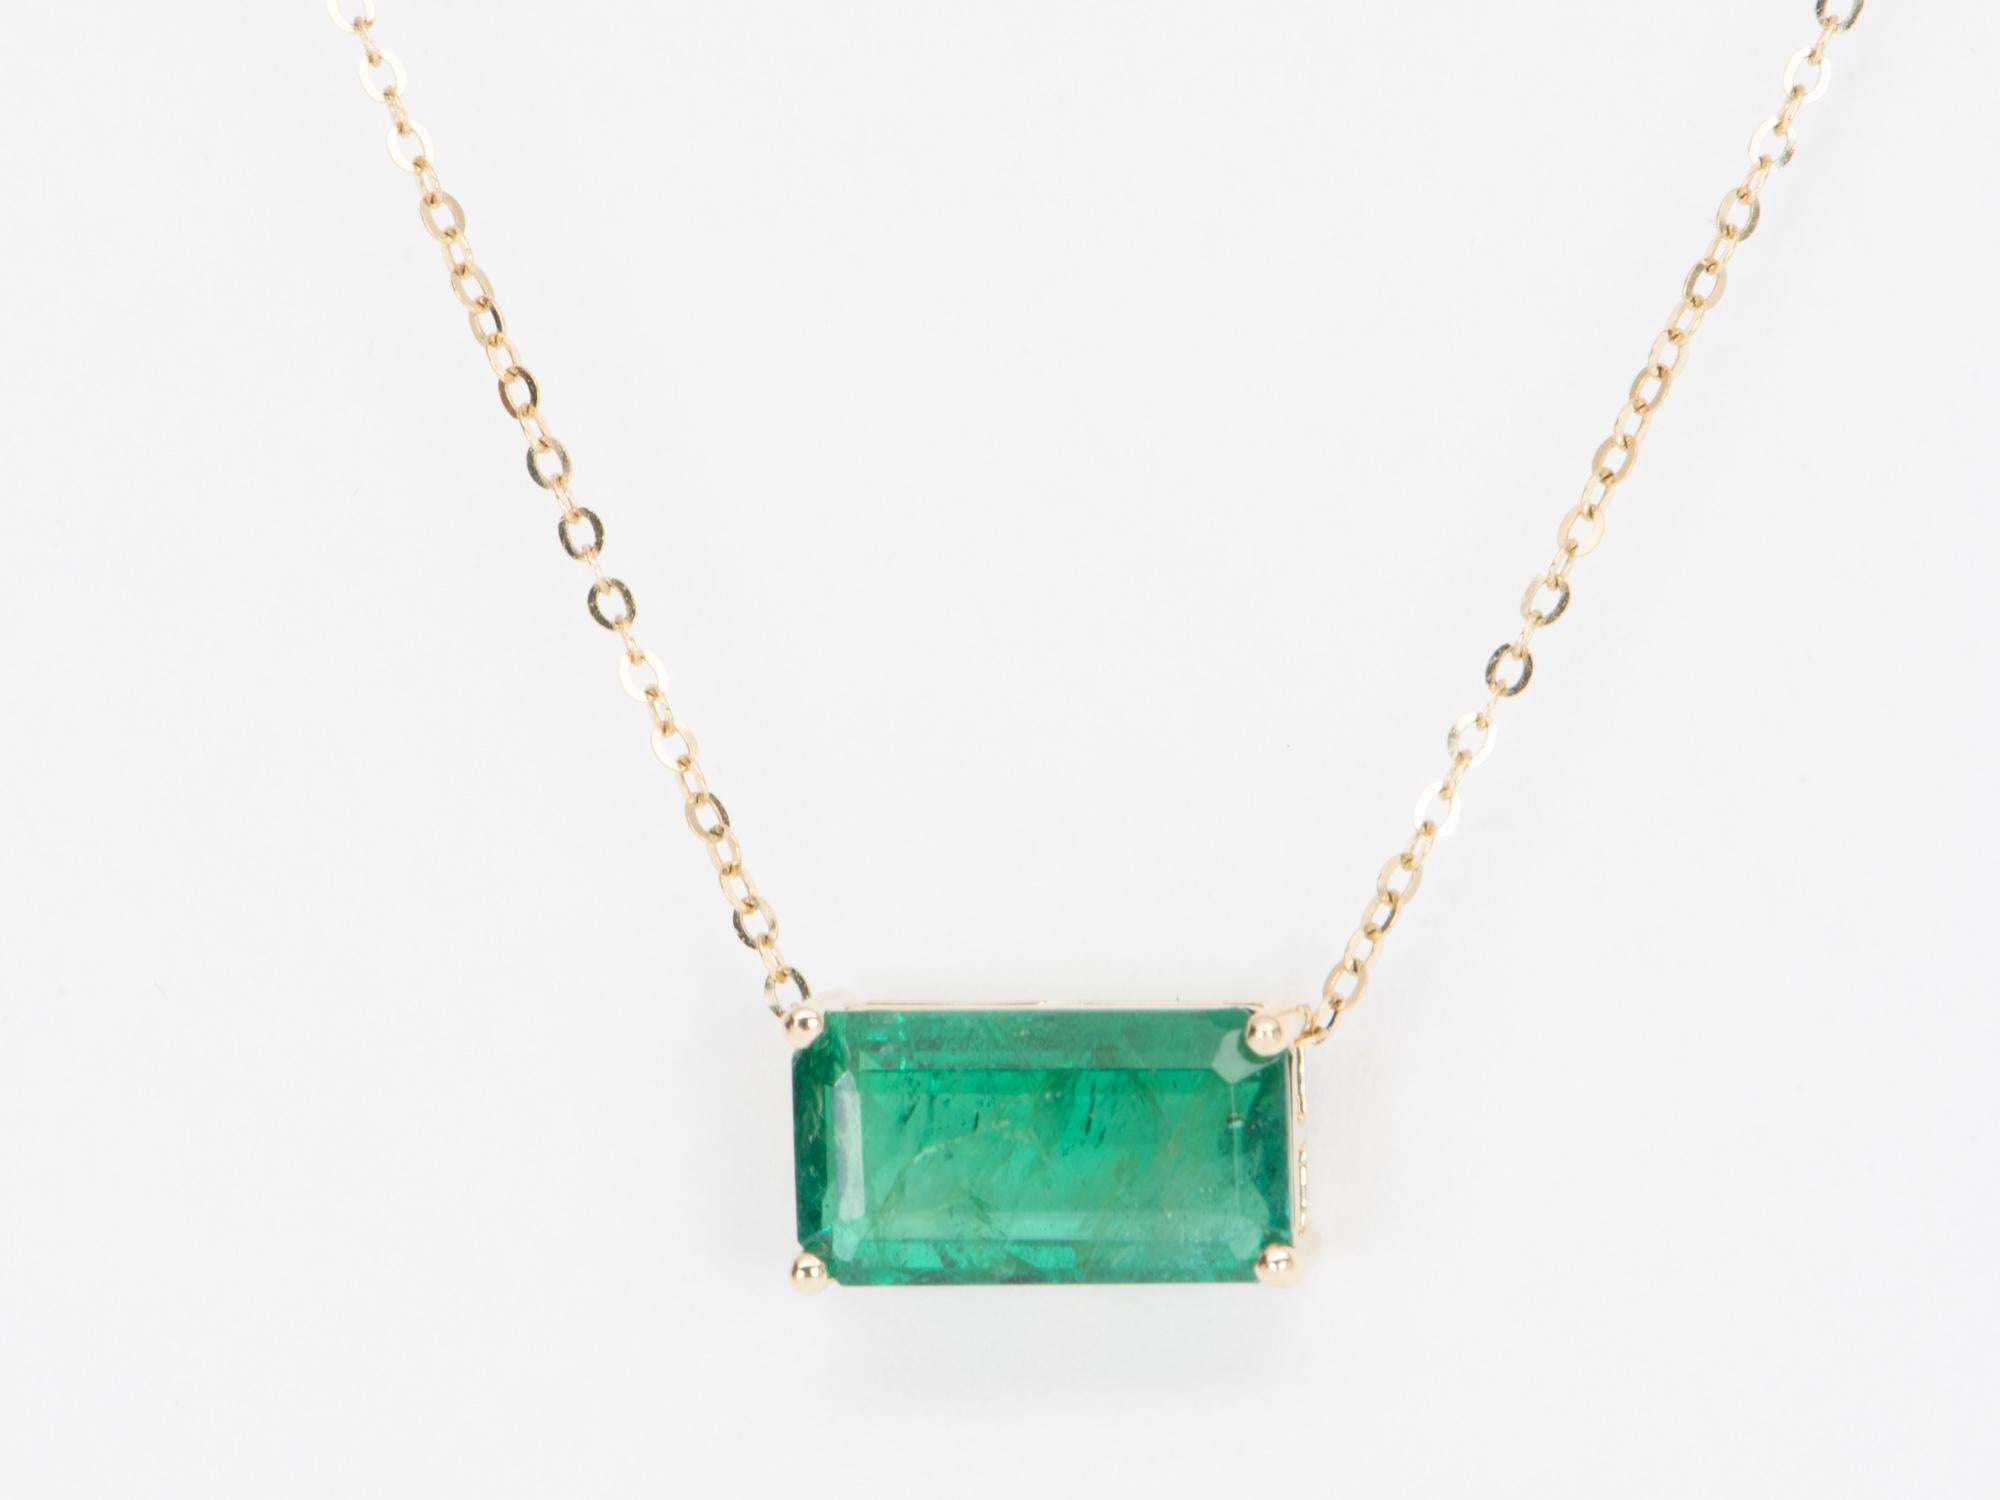 This elegant, timeless necklace features a stunning 3.76ct rich green Zambian emerald that is the focal point of the design. The emerald is set into a classic prong design that can be worn vertically or horizontally on the chain to suit any